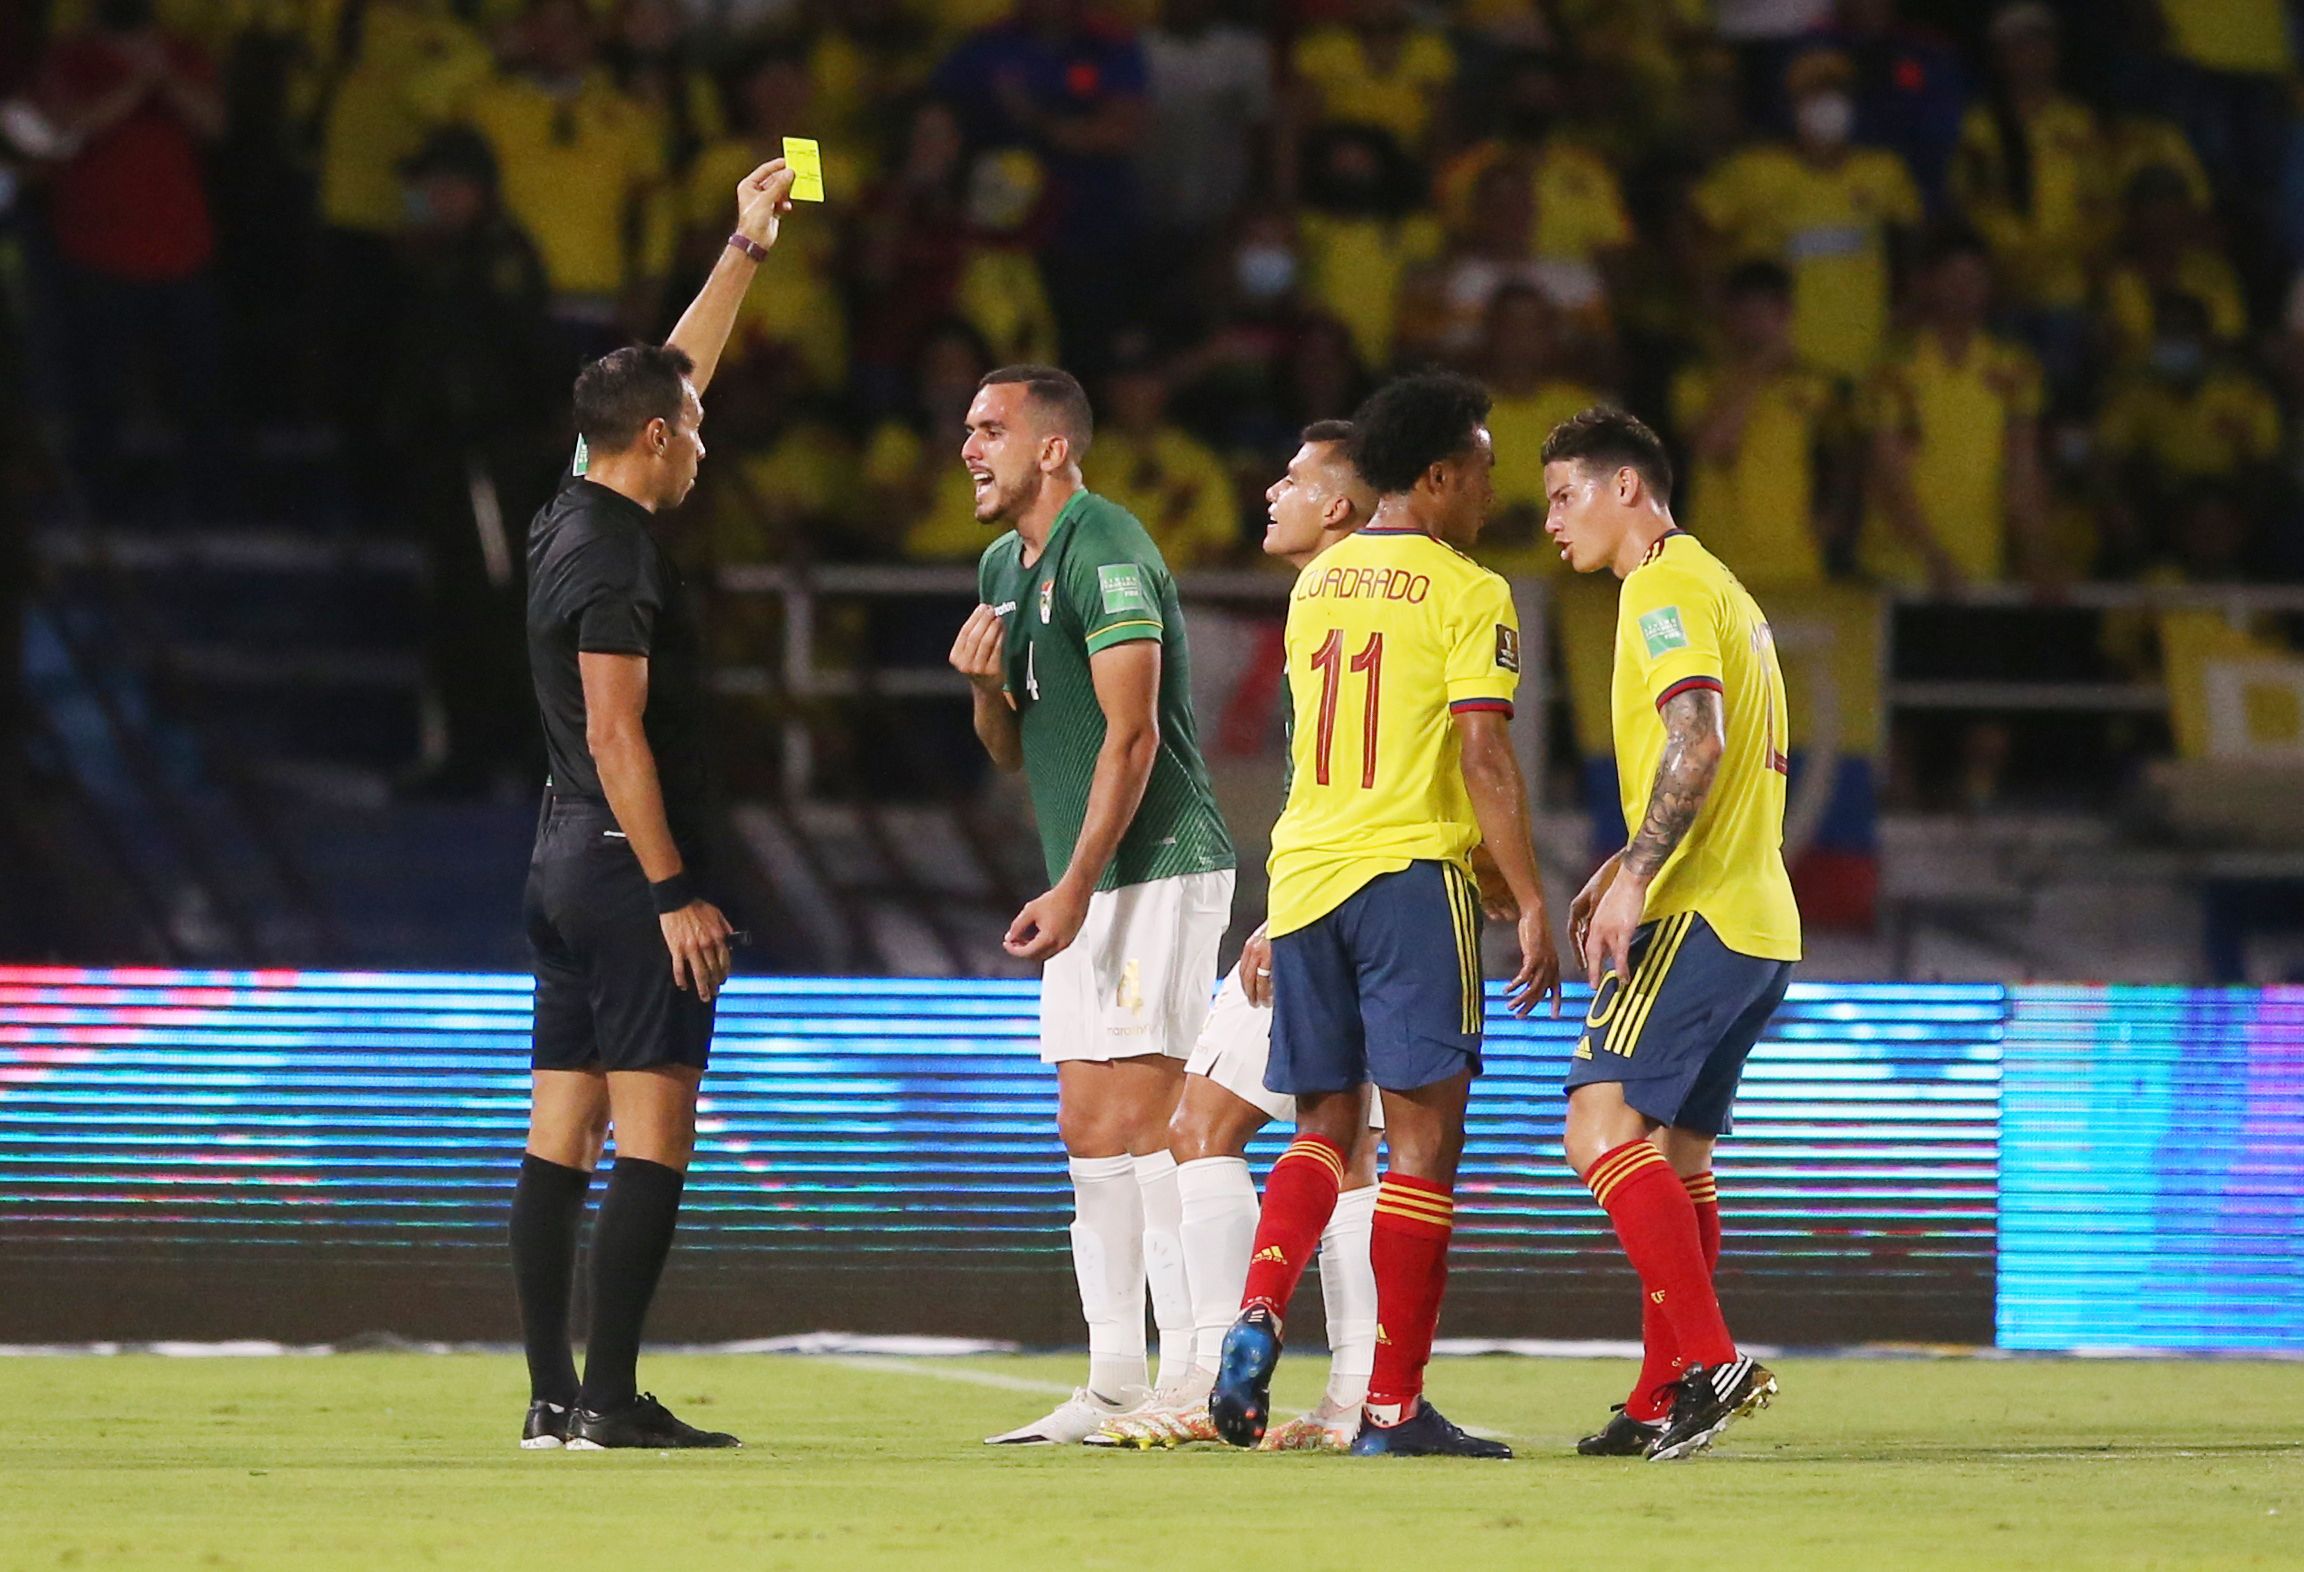 Facundo Tello will be one of the referee's at the 2022 World Cup